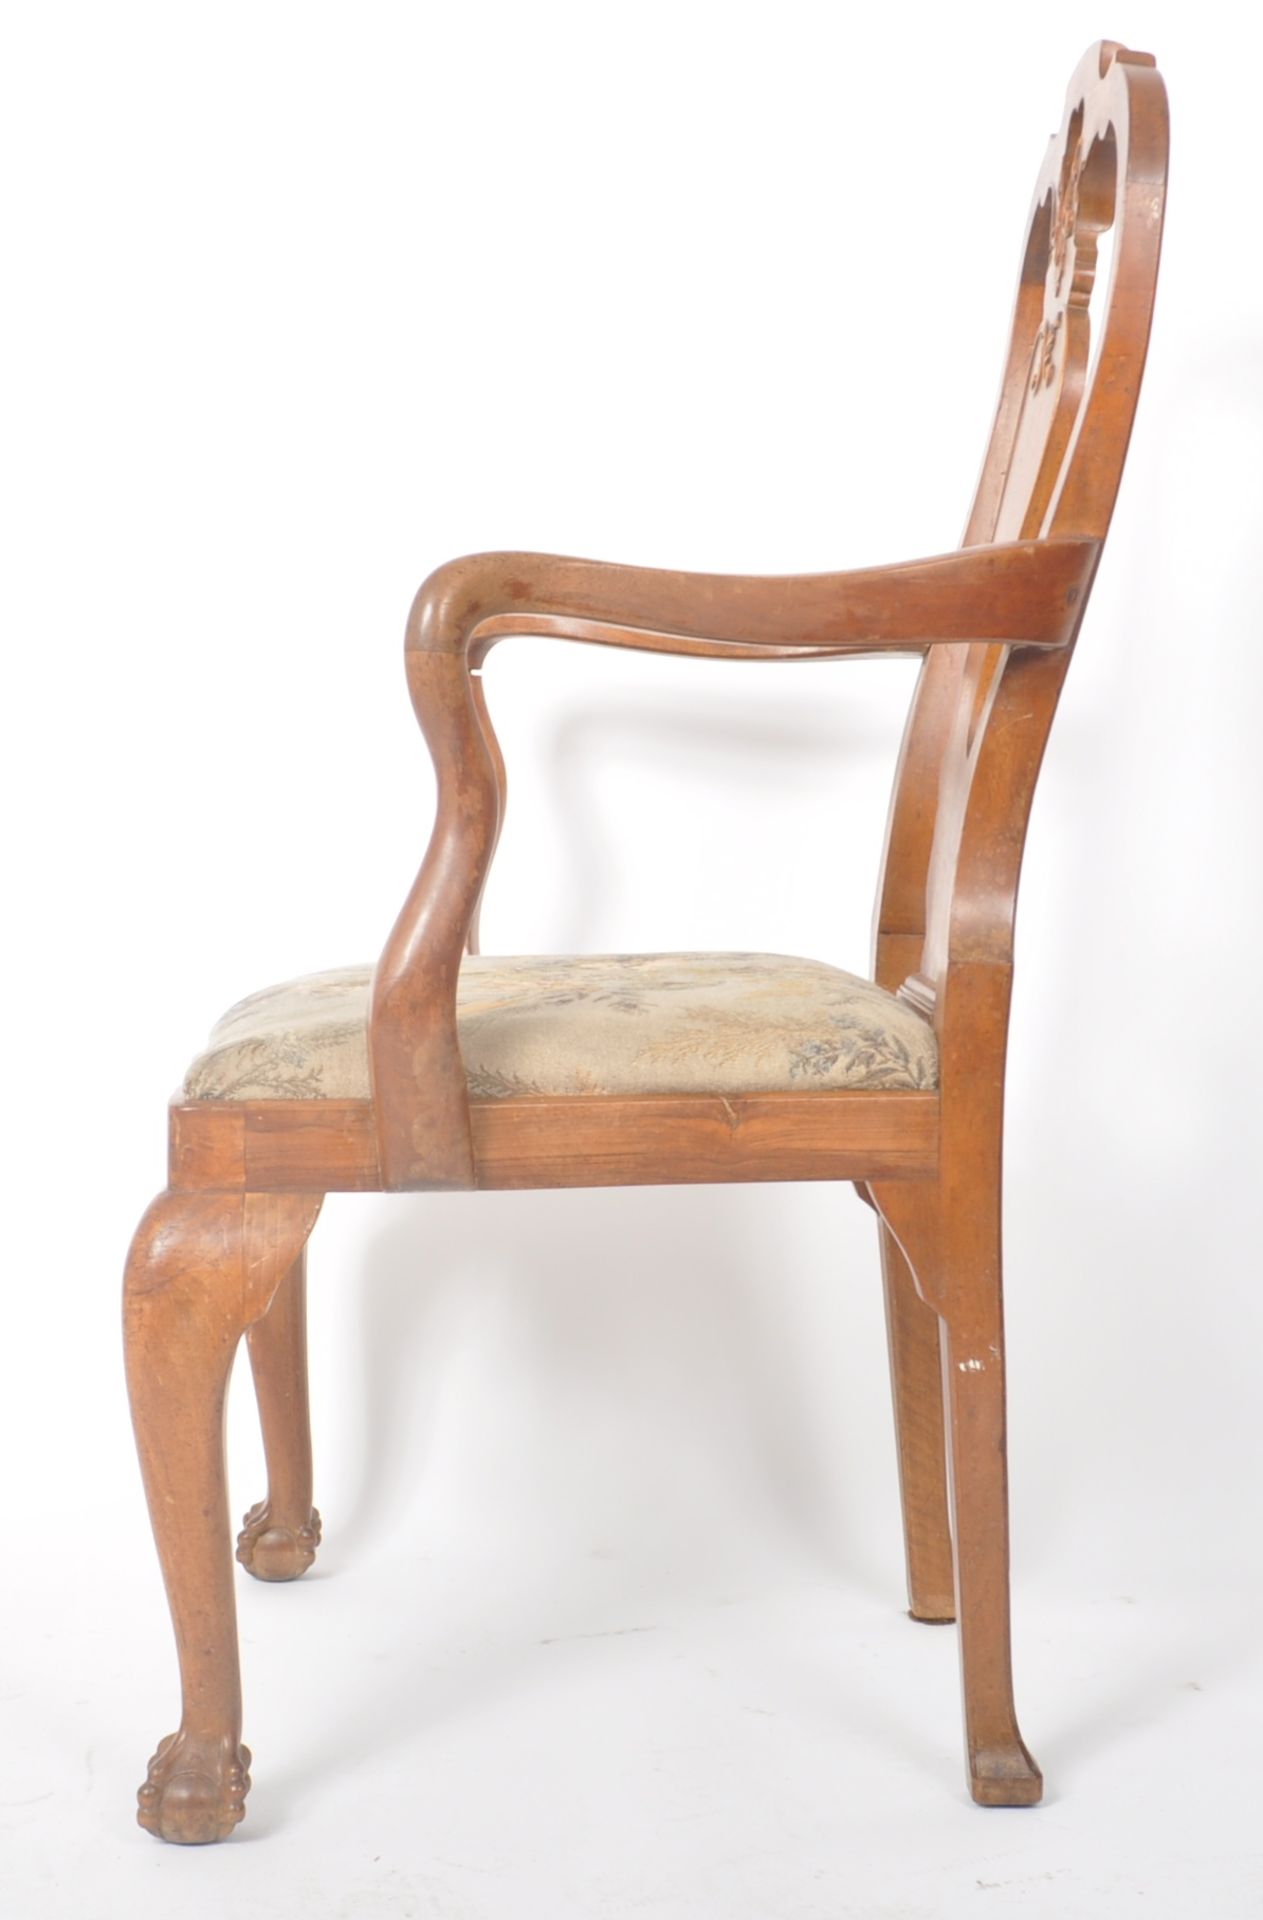 EARLY 19TH CENTURY CARVED WALNUT CARVER ARMCHAIR - Image 7 of 8